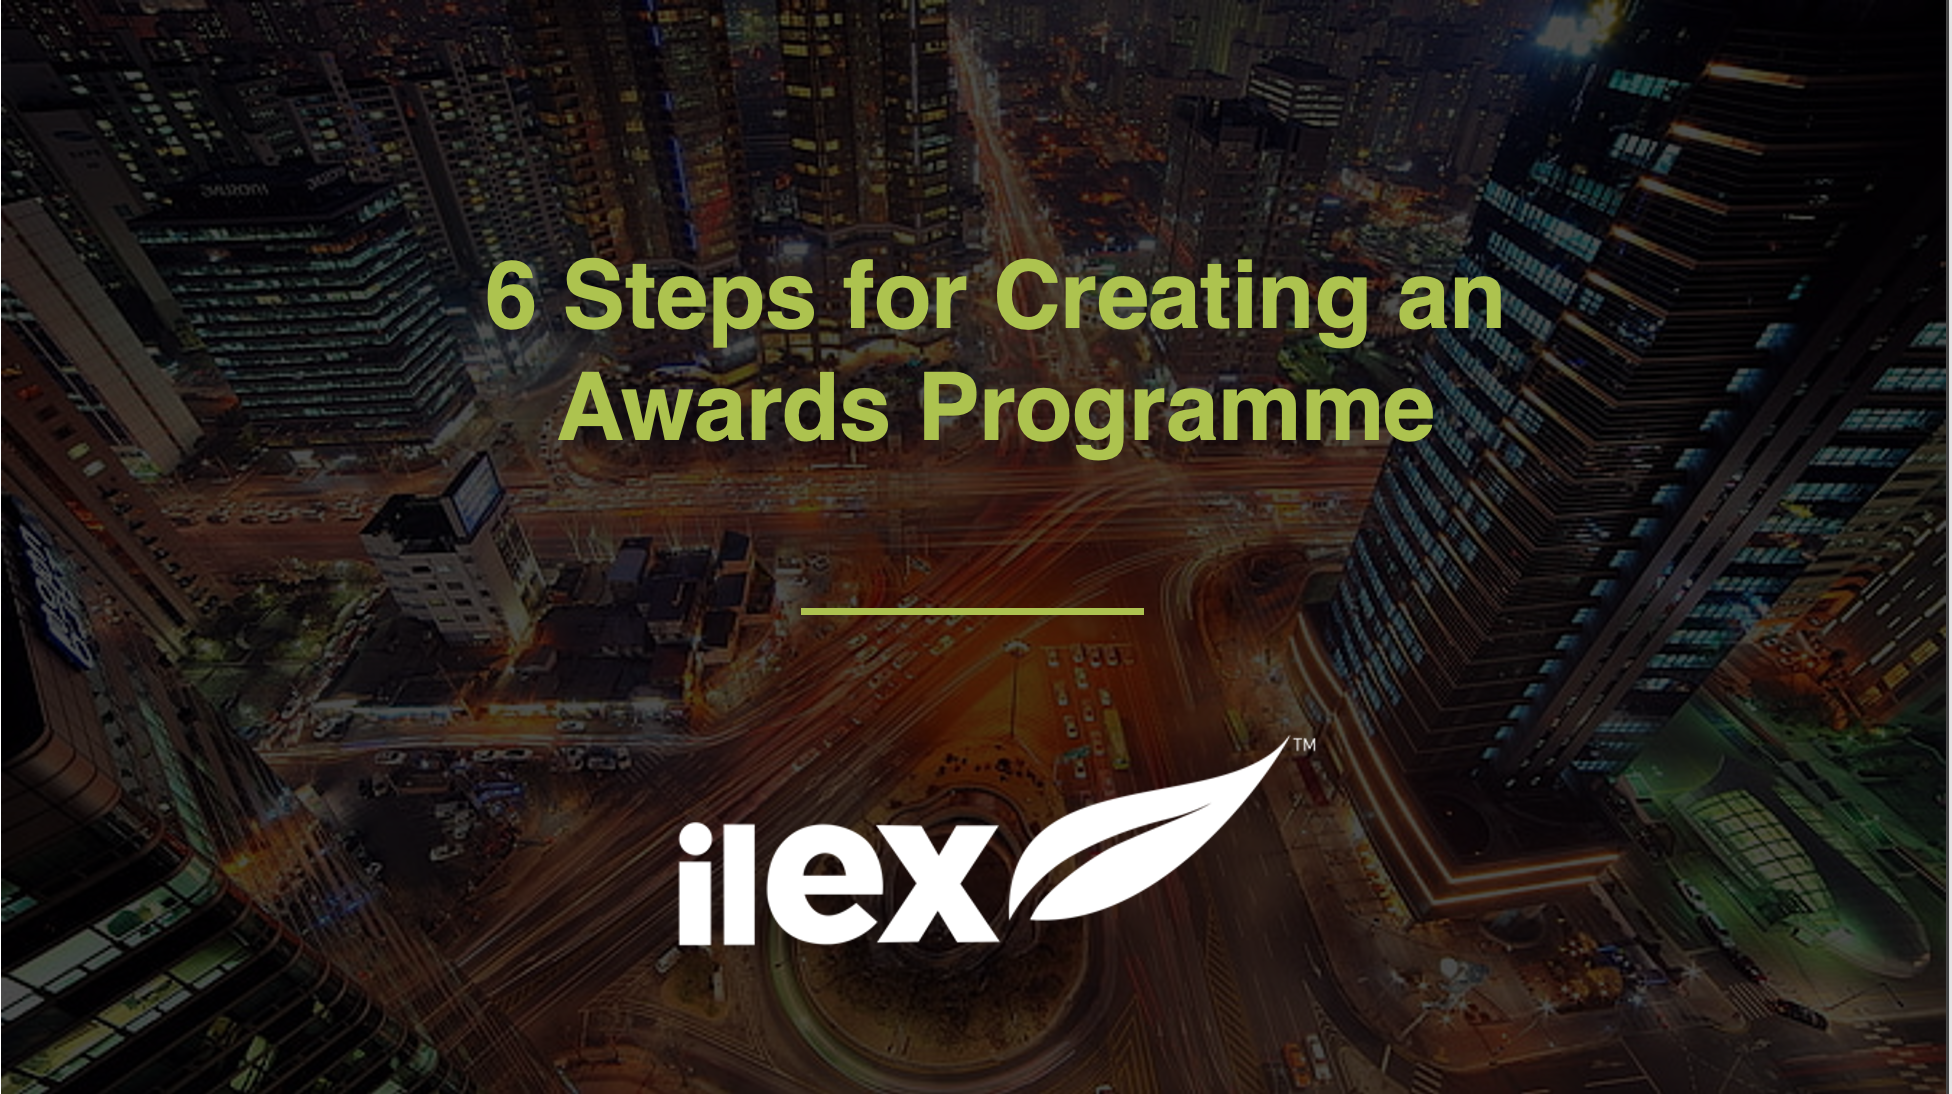 6 Steps for Creating an Awards Programme